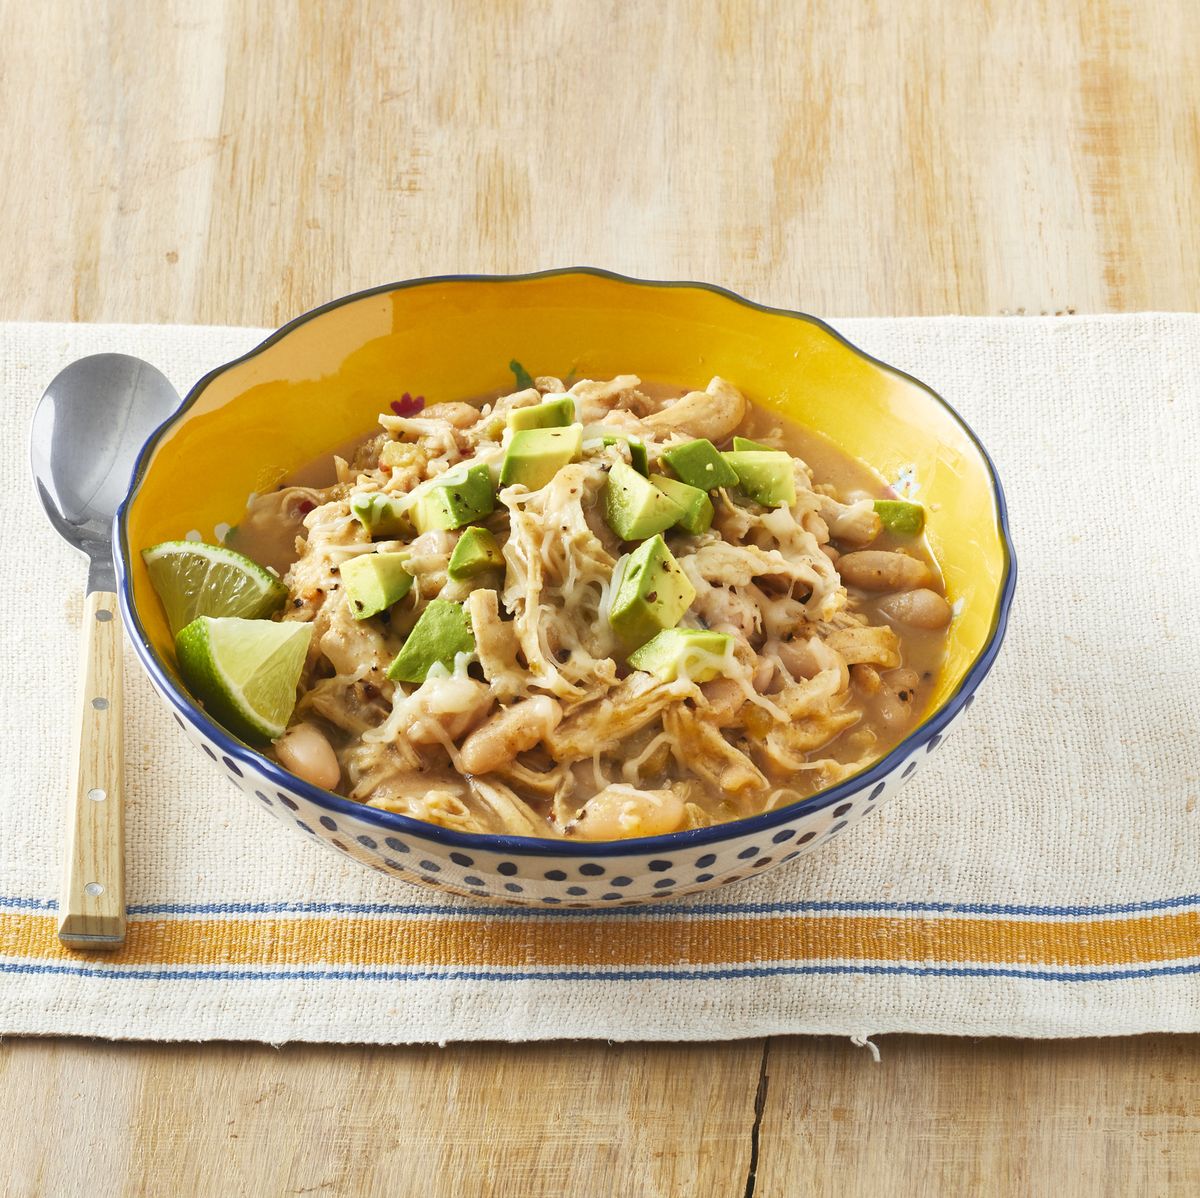 https://hips.hearstapps.com/hmg-prod/images/slow-cooker-white-chicken-chili-1589314664.jpg?crop=0.668xw:1.00xh;0.112xw,0&resize=1200:*